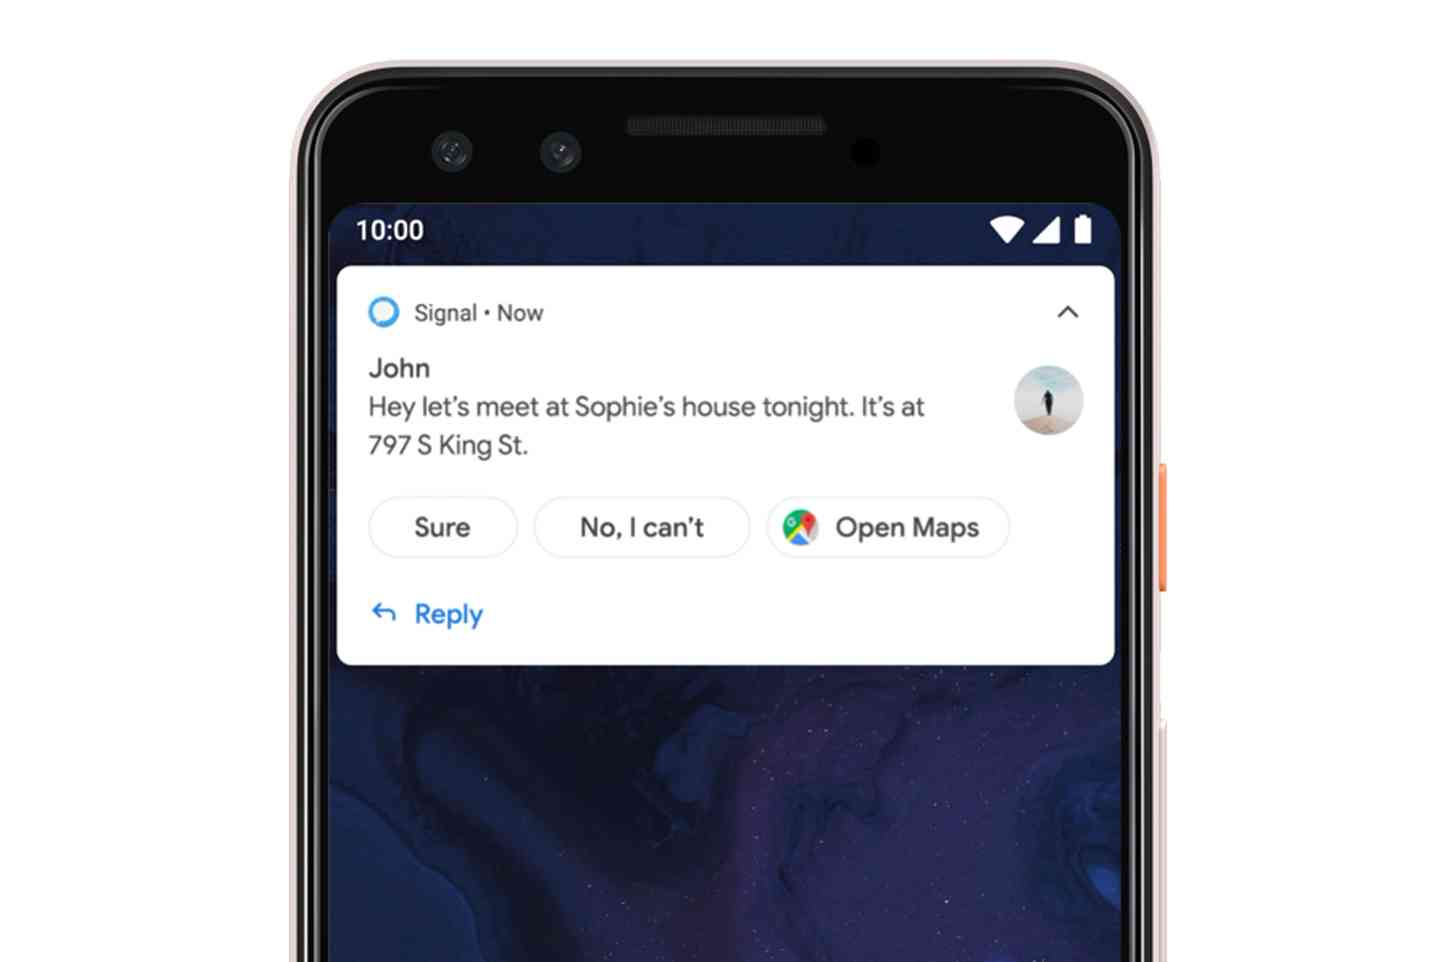 Android Q notification suggestions